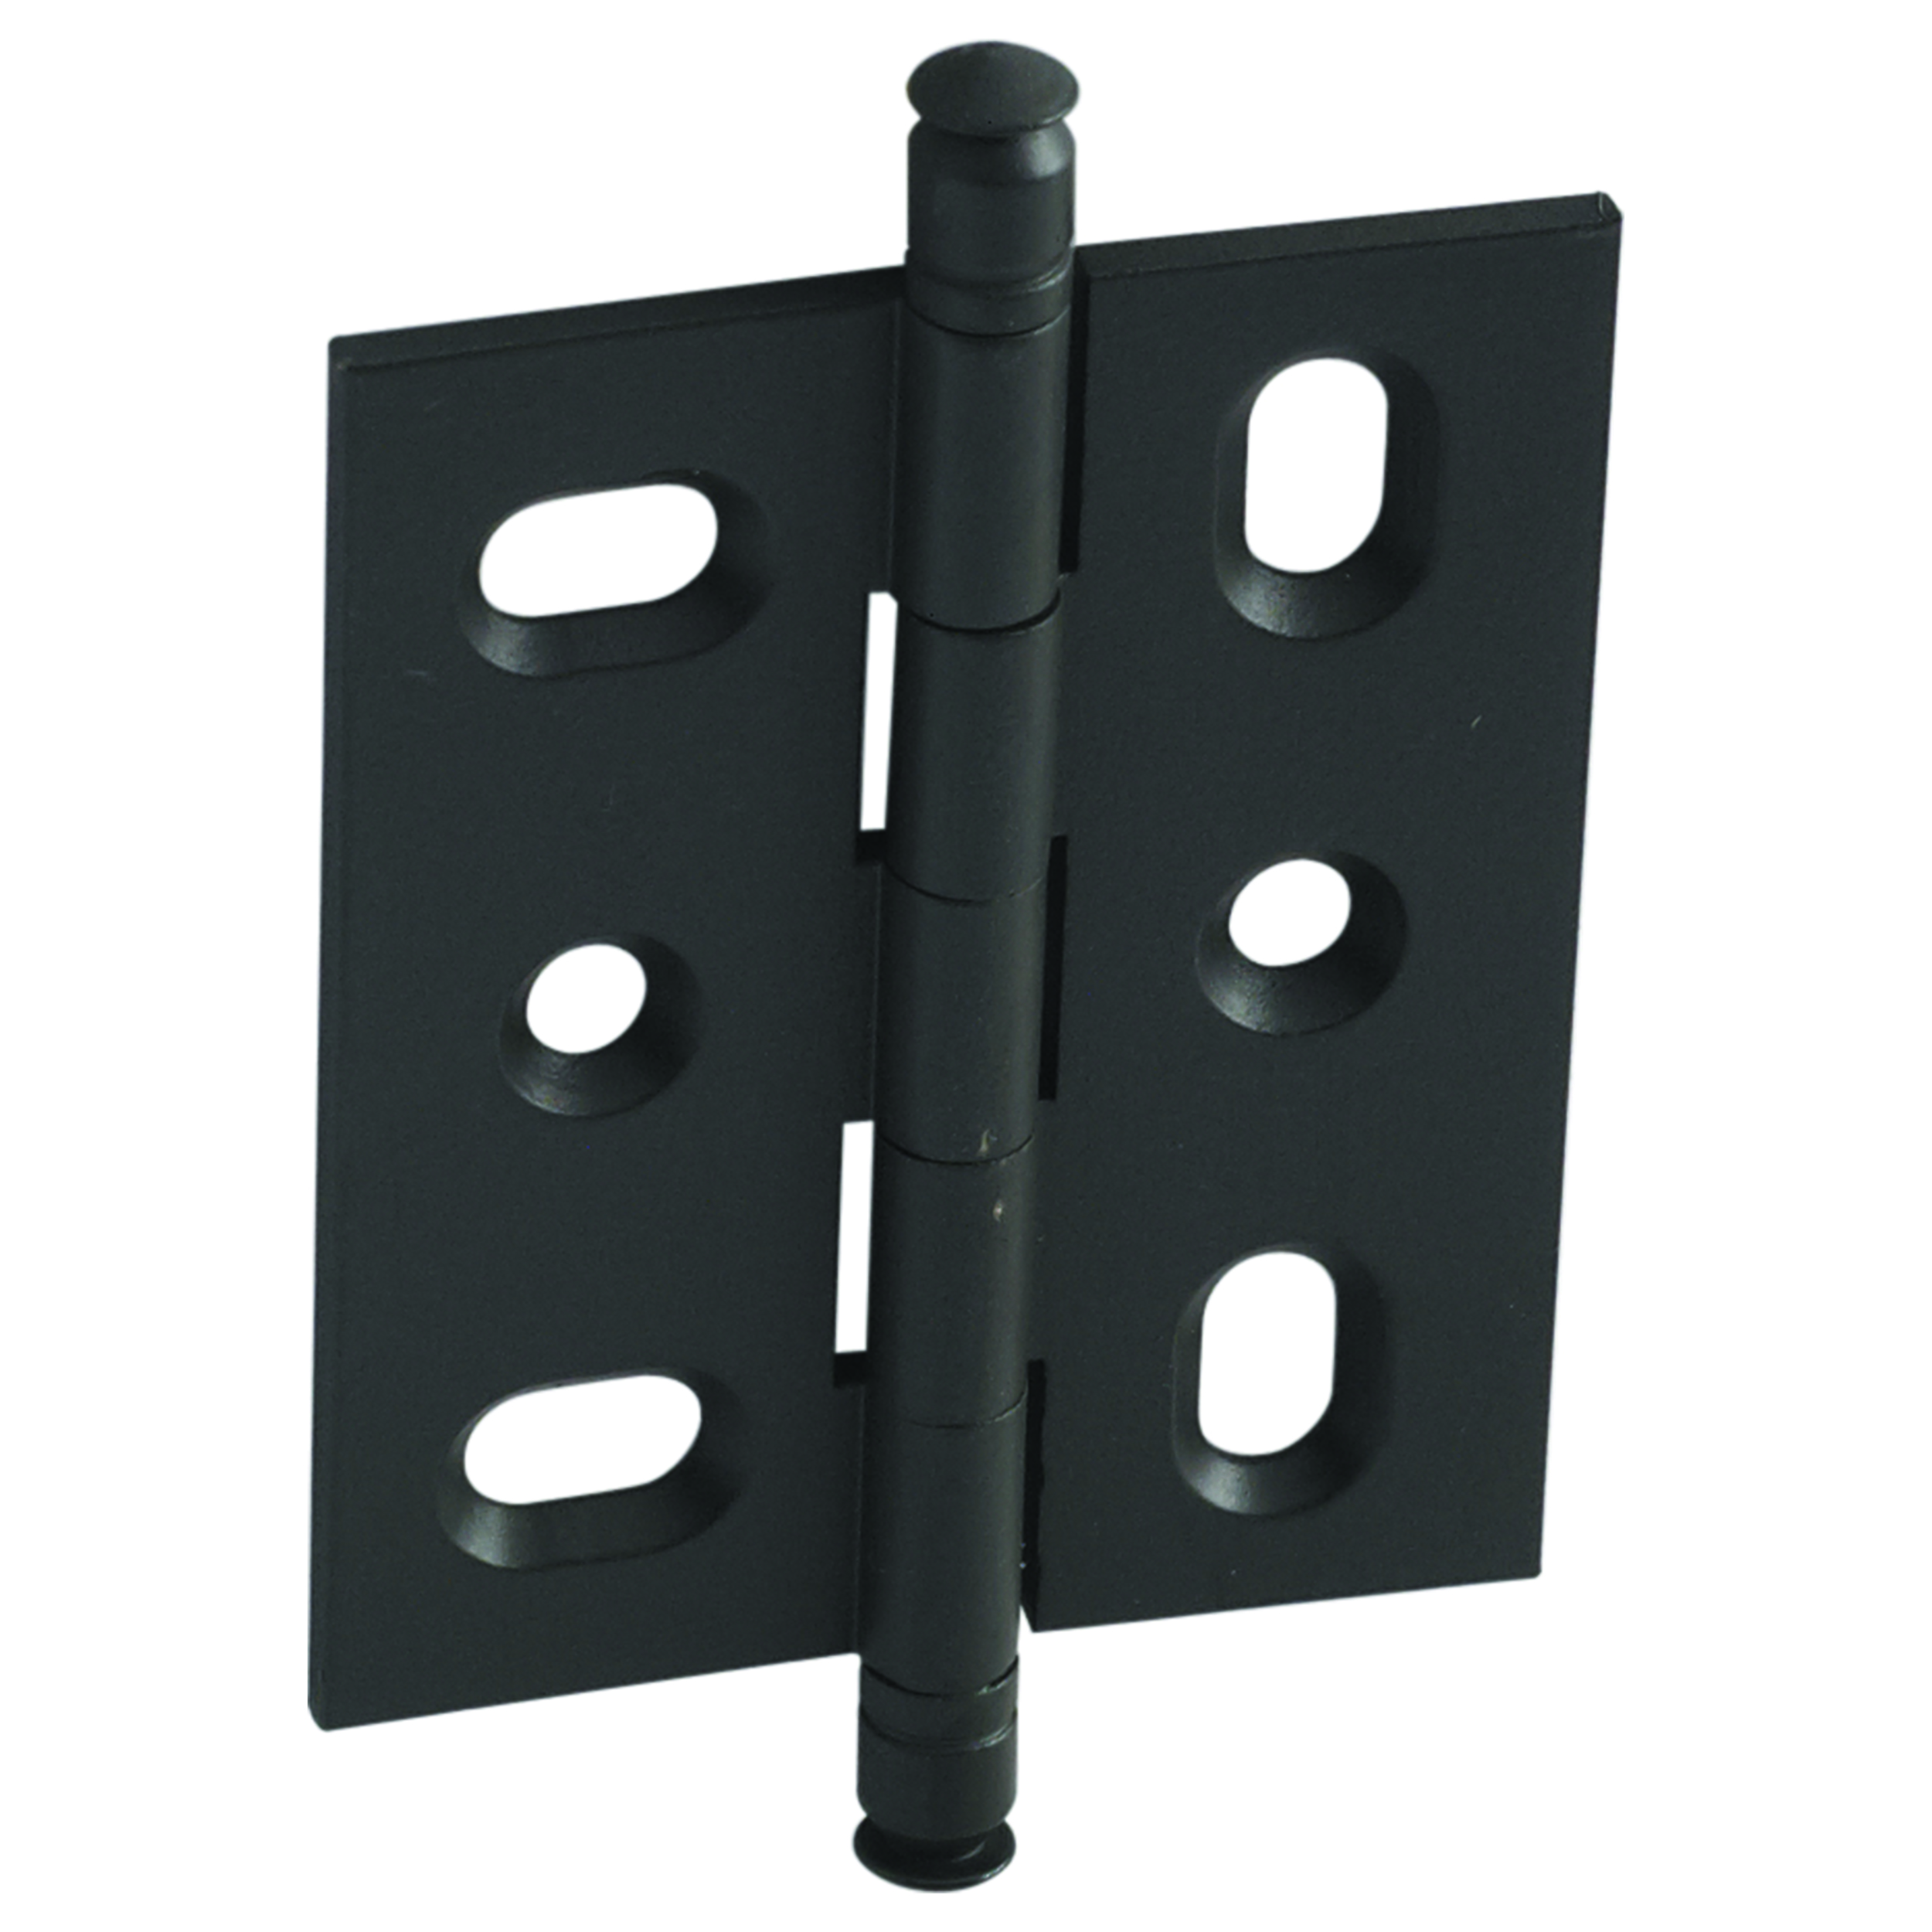 Mortised Decorative Solid Brass Butt Hinge With Finial In Dark Oil-rubbed Bronze - Model# 354.22.141